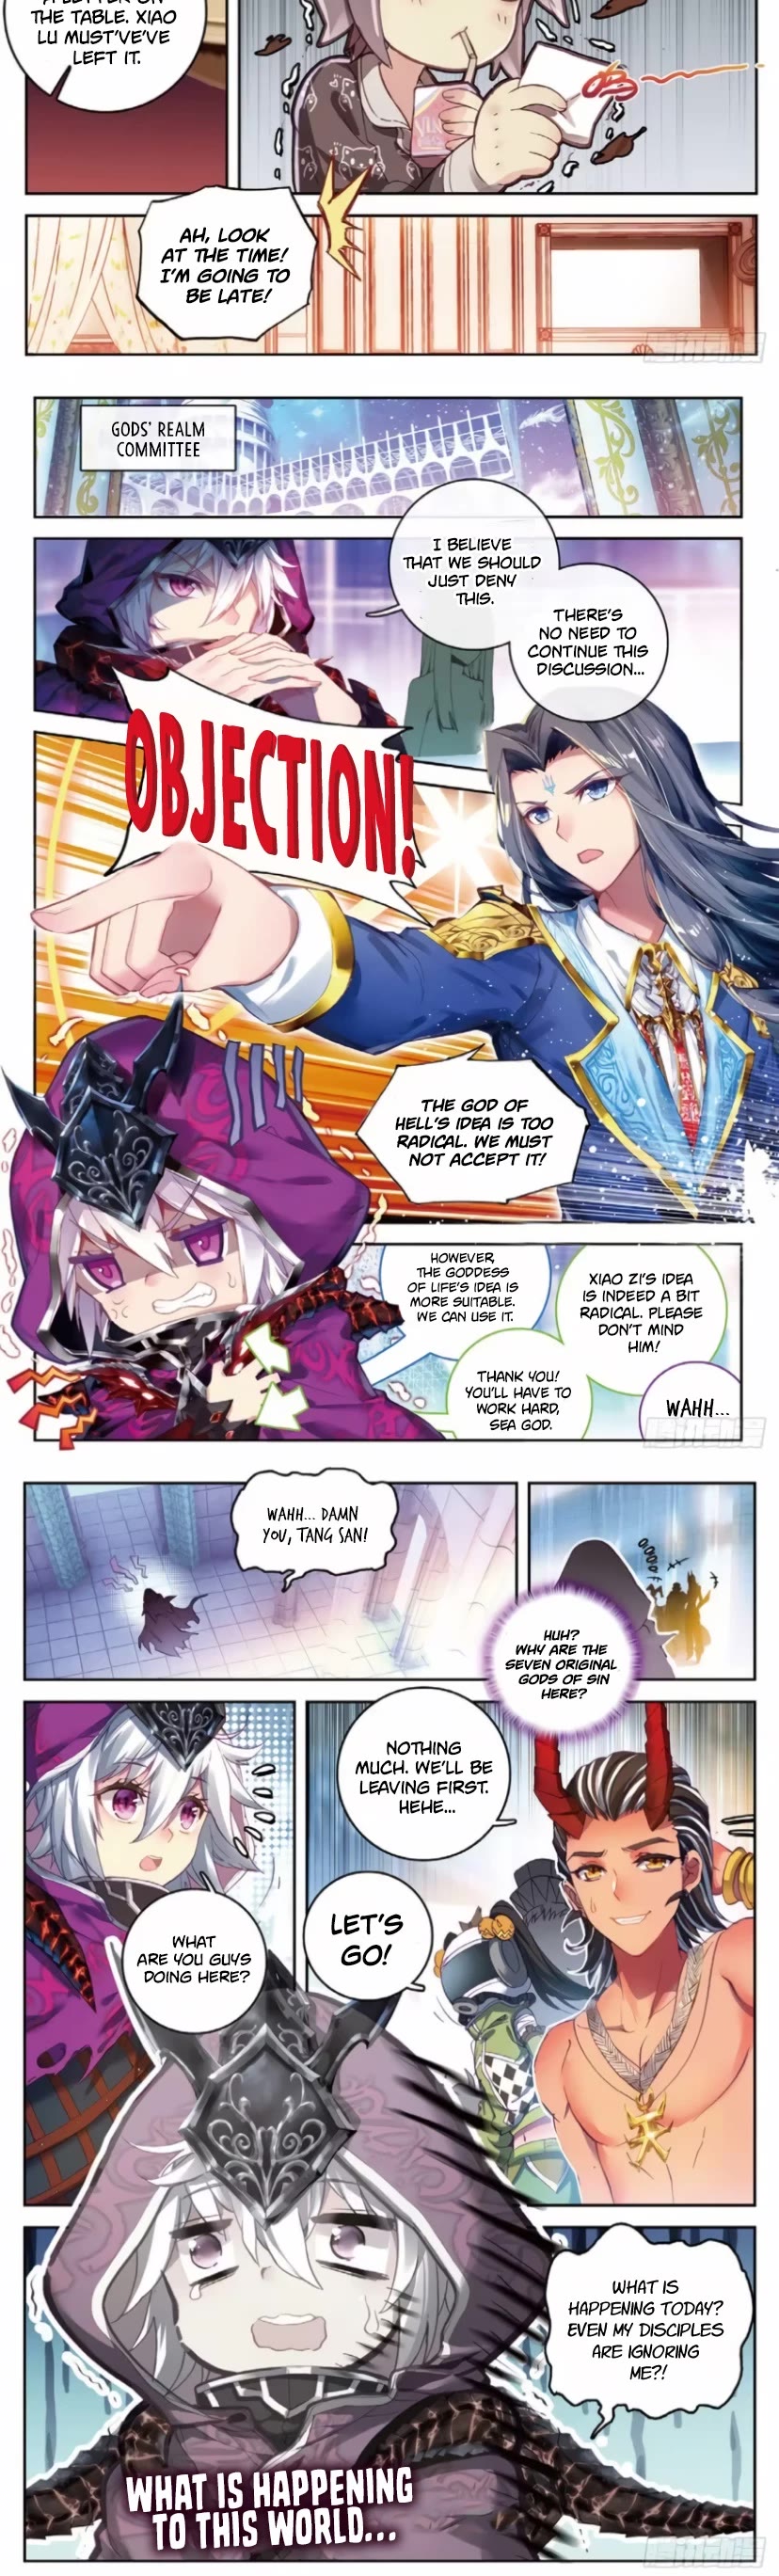 Soul Land - Legend Of The Gods' Realm Chapter 74: Last Extra - Series End - Picture 3